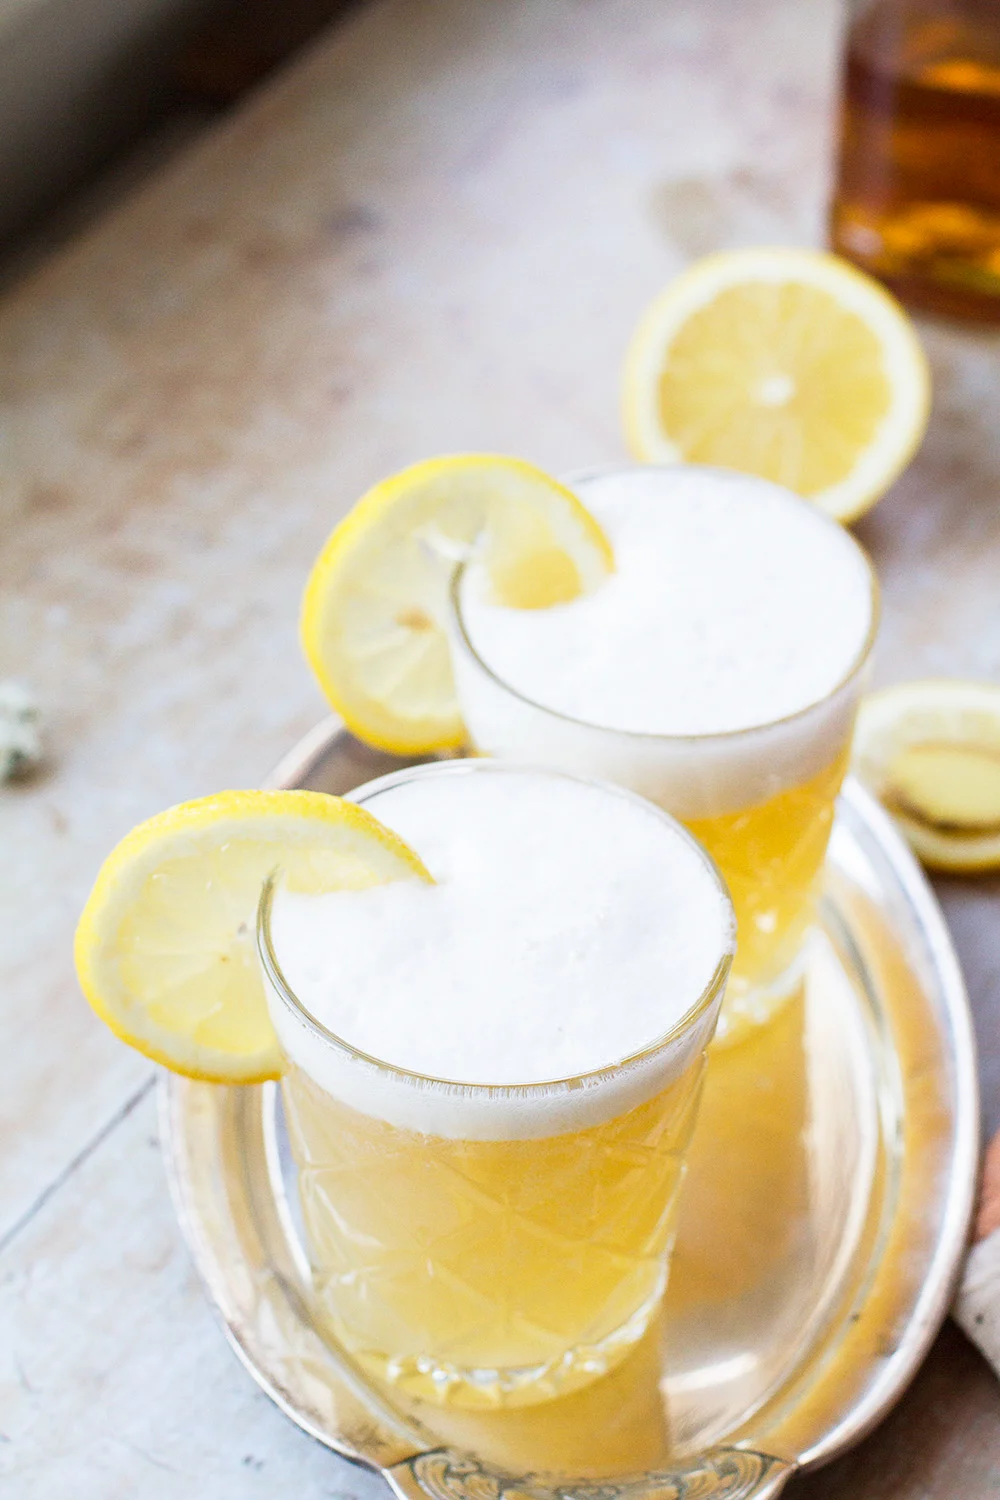 Two glasses with whiskey sour and a frothy top, garnished with lemon slices.